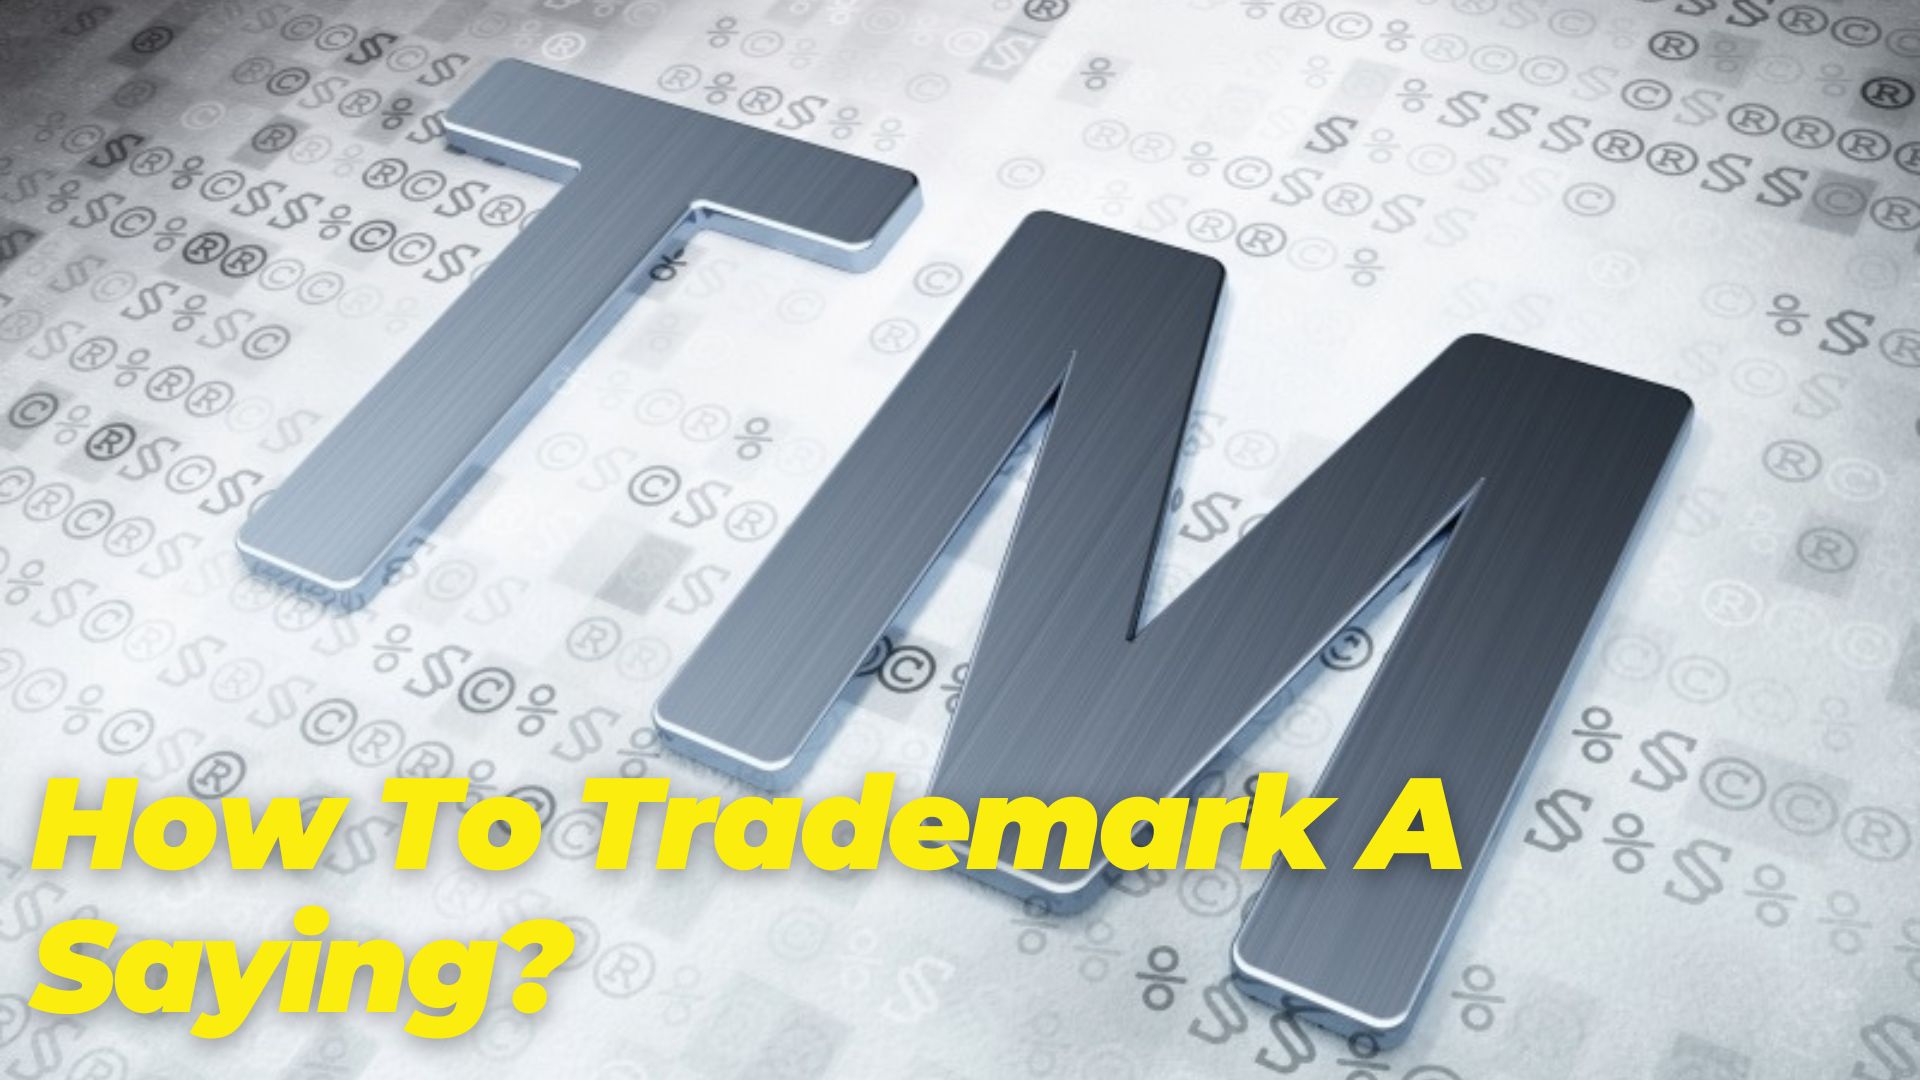 How To Trademark a Saying